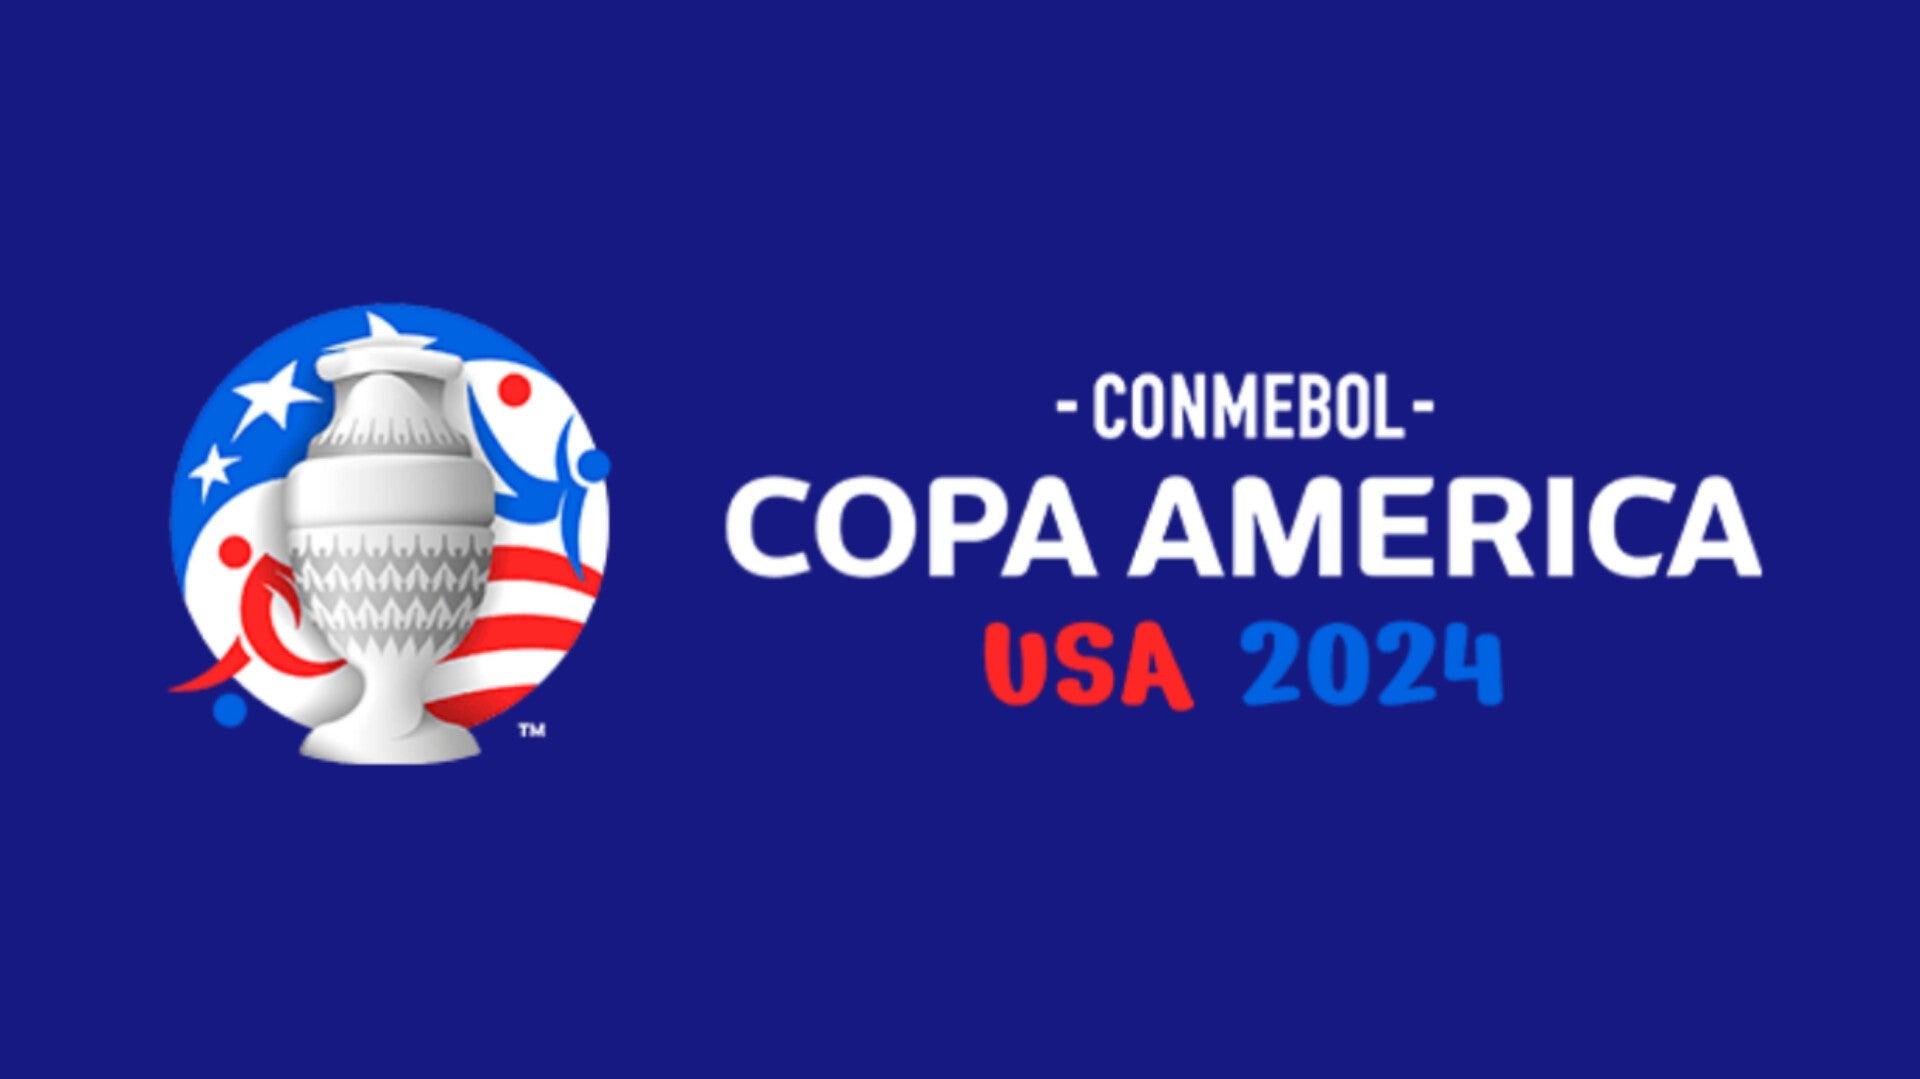 Soccer - 2024 - COPA America USA - Panini - Pack of Stickers (5 Stickers) - Hobby Champion Inc